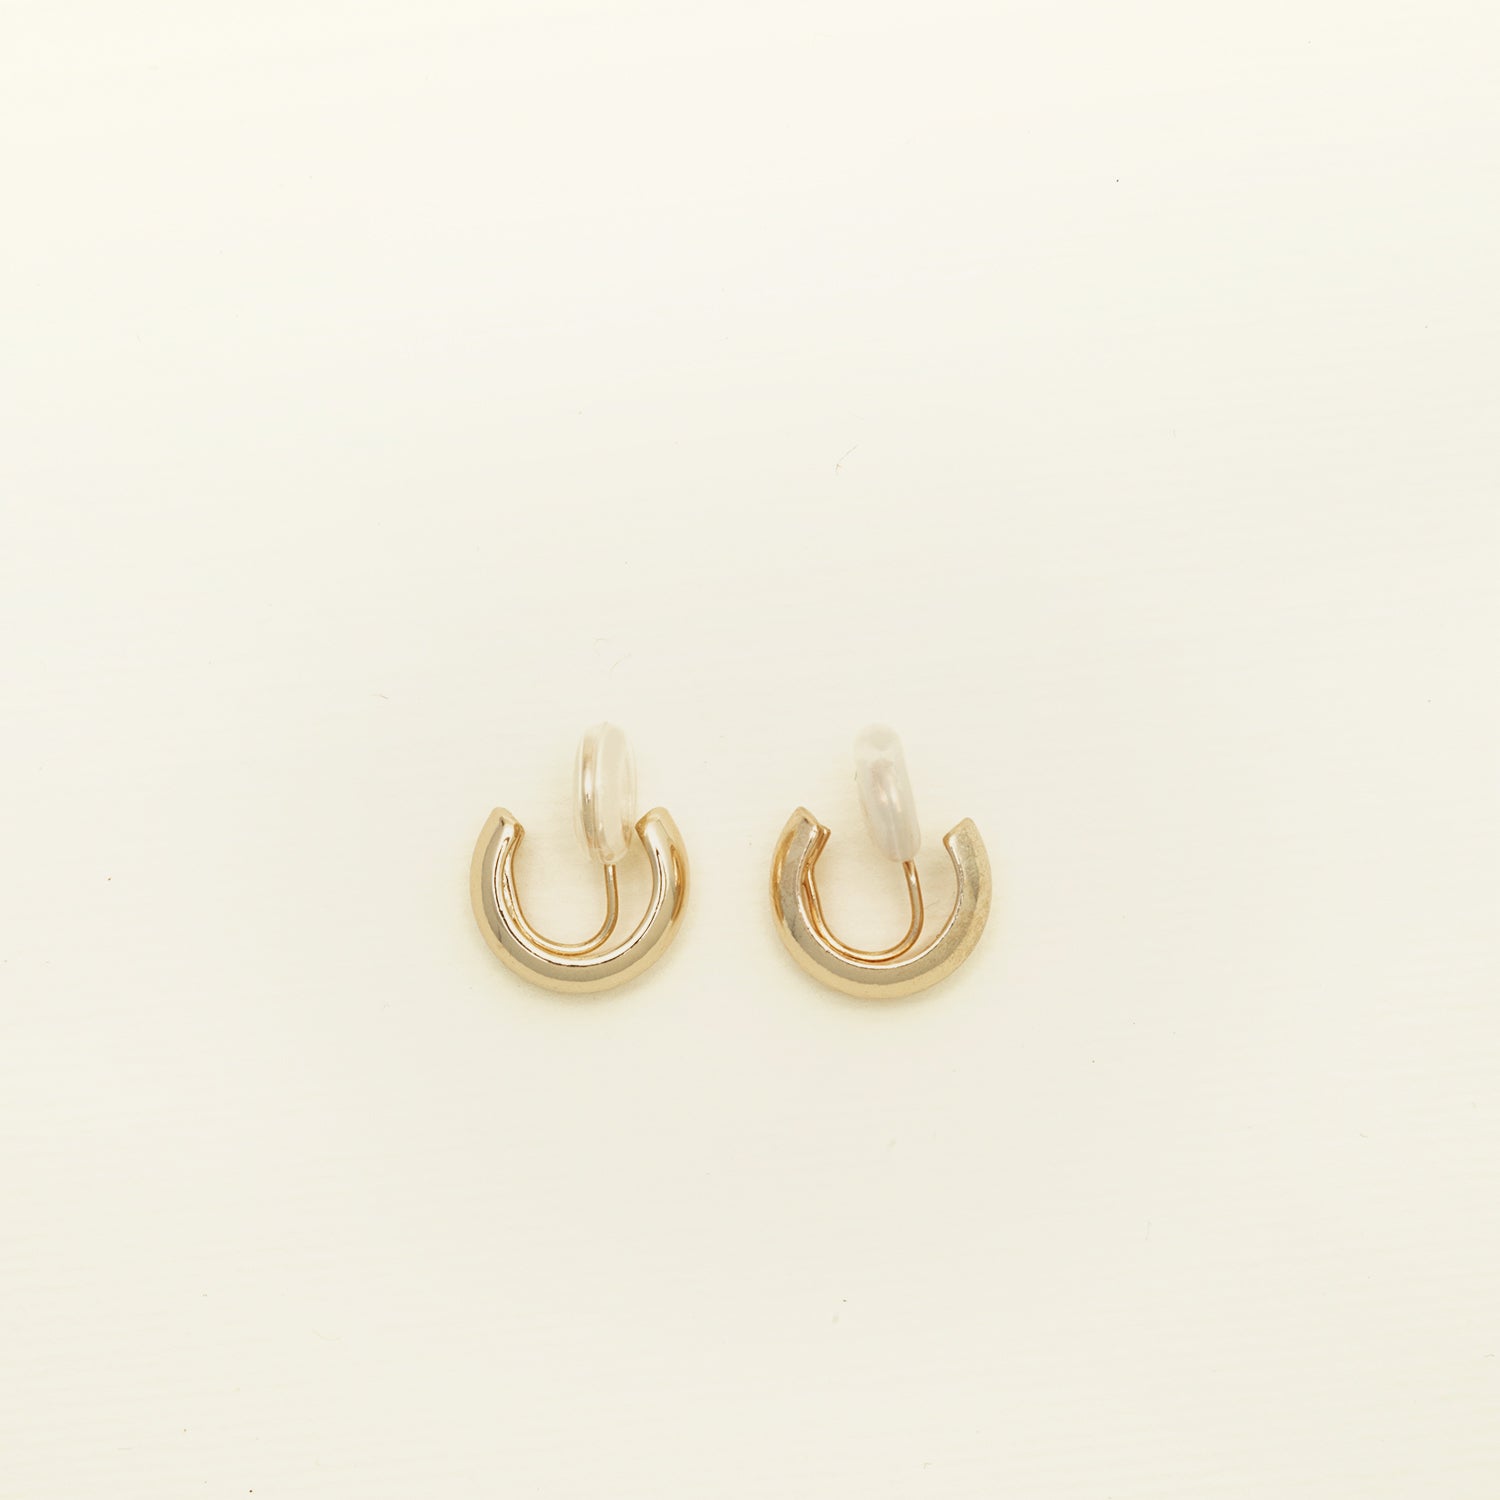 Image of the Simple Gold Huggie Clip-On Earrings feature a mosquito coil closure ideal for all ear types, providing a medium-secure hold and comfortable wear for up to 24 hours. These earrings can be adjusted with a gentle squeeze of the padding forward once on the ear. Crafted with Gold tone plated copper alloy, these sophisticated earrings are also available in Silver.